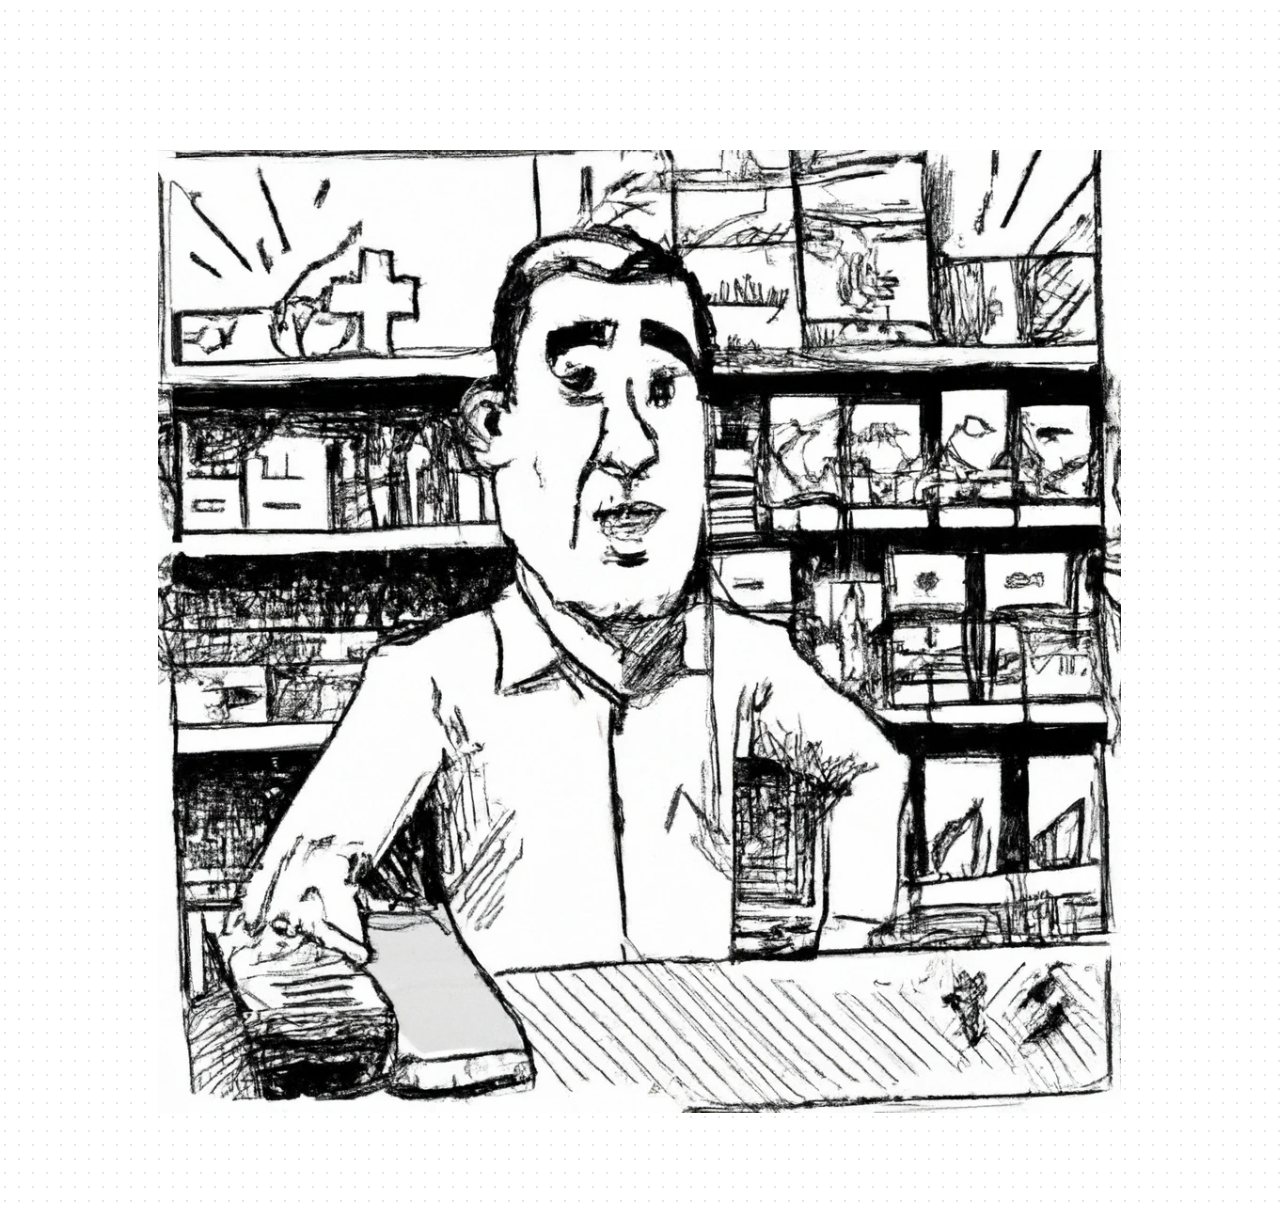 Dall-e2 Query: hatching style, hapless drug store proprietor